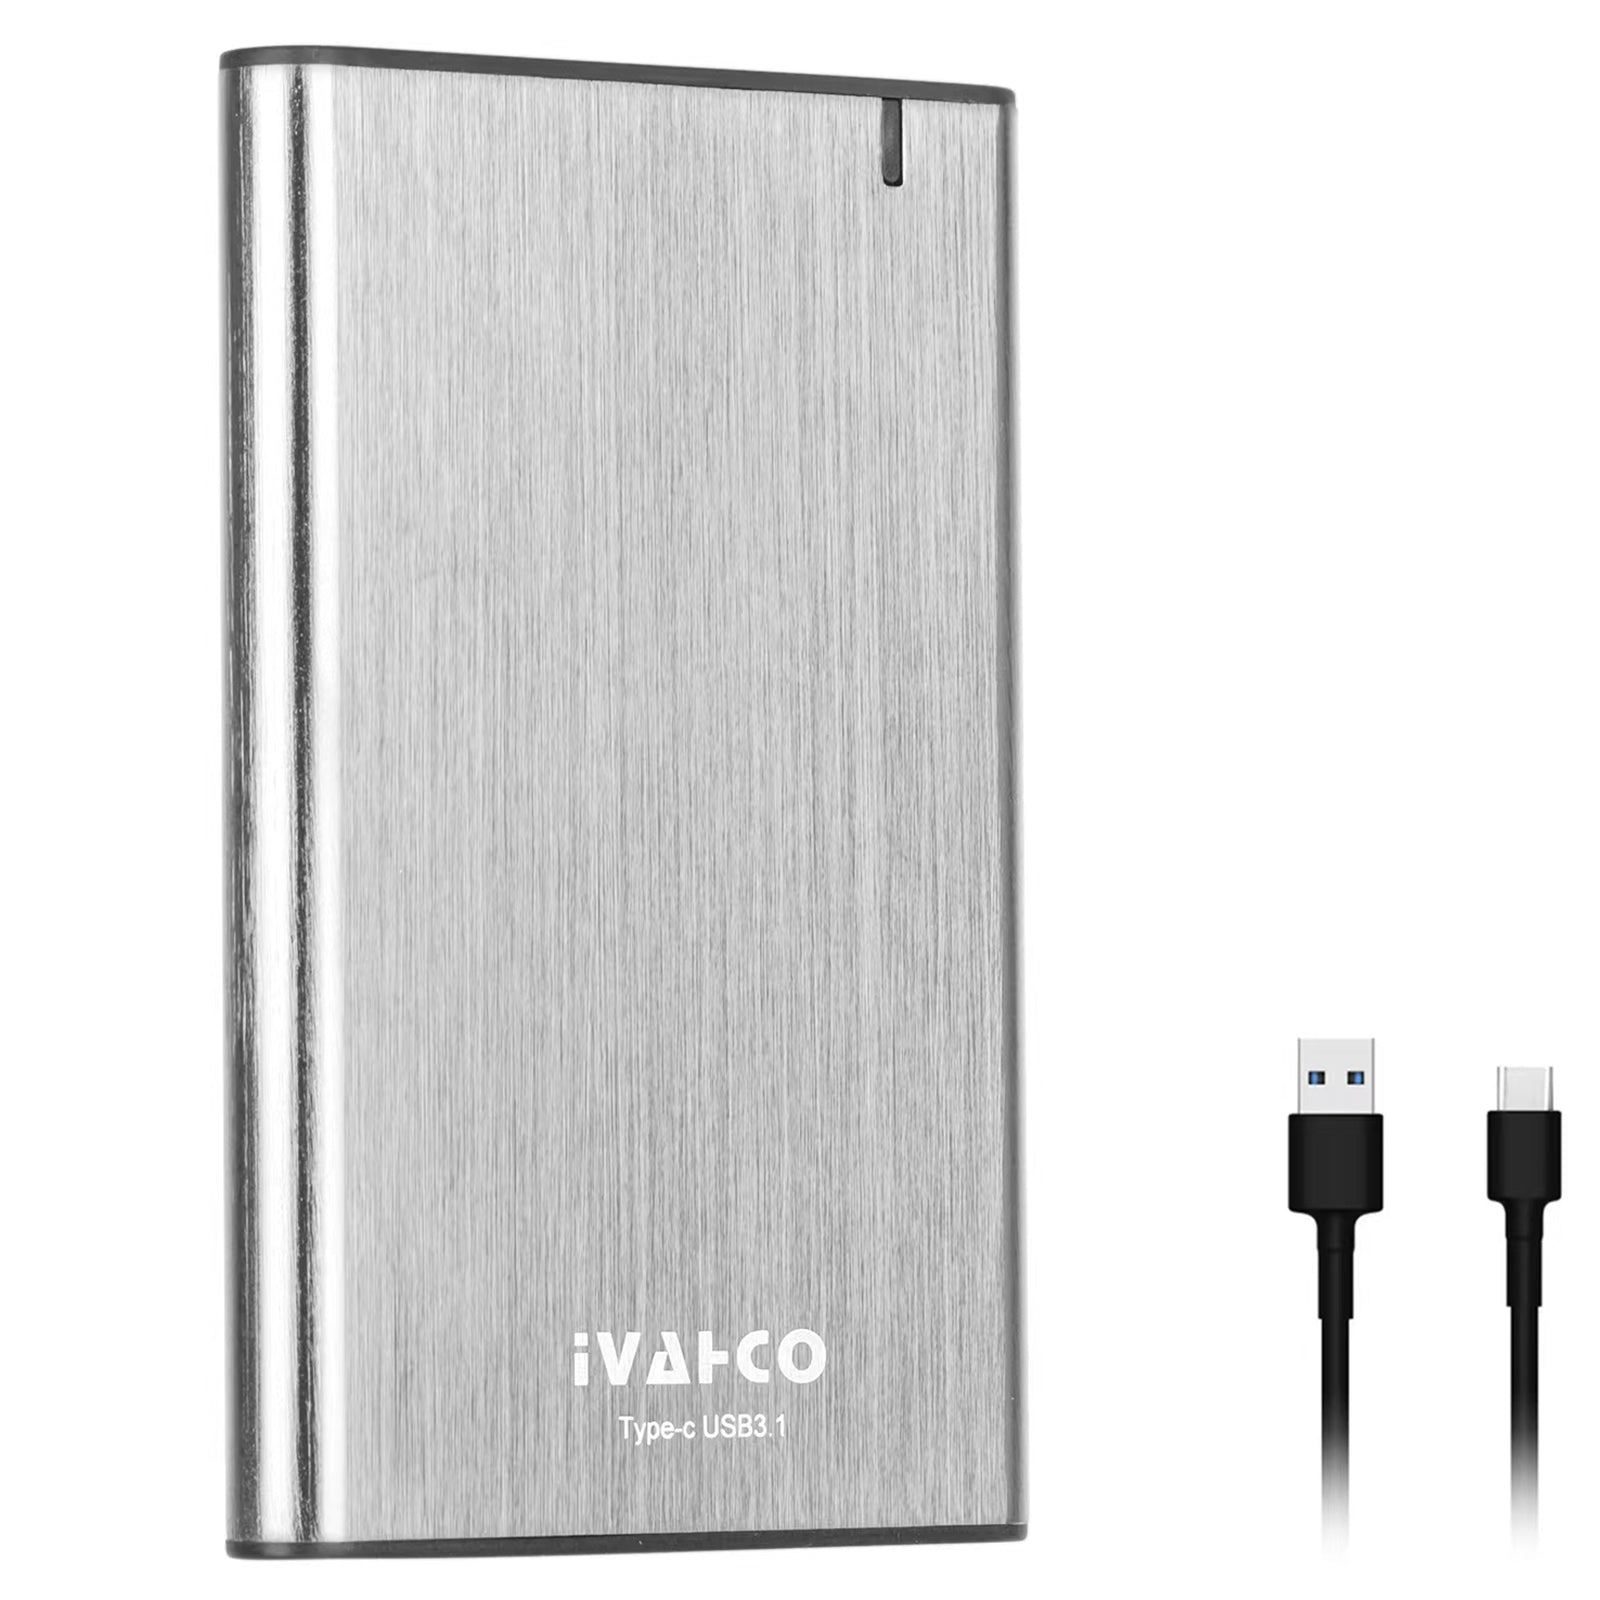 IVAHCO 1TB Type-C USB3.1 2.5" HDD External Case Plug and Play Brushed Metal Solid State Drive Enclosure - Silver